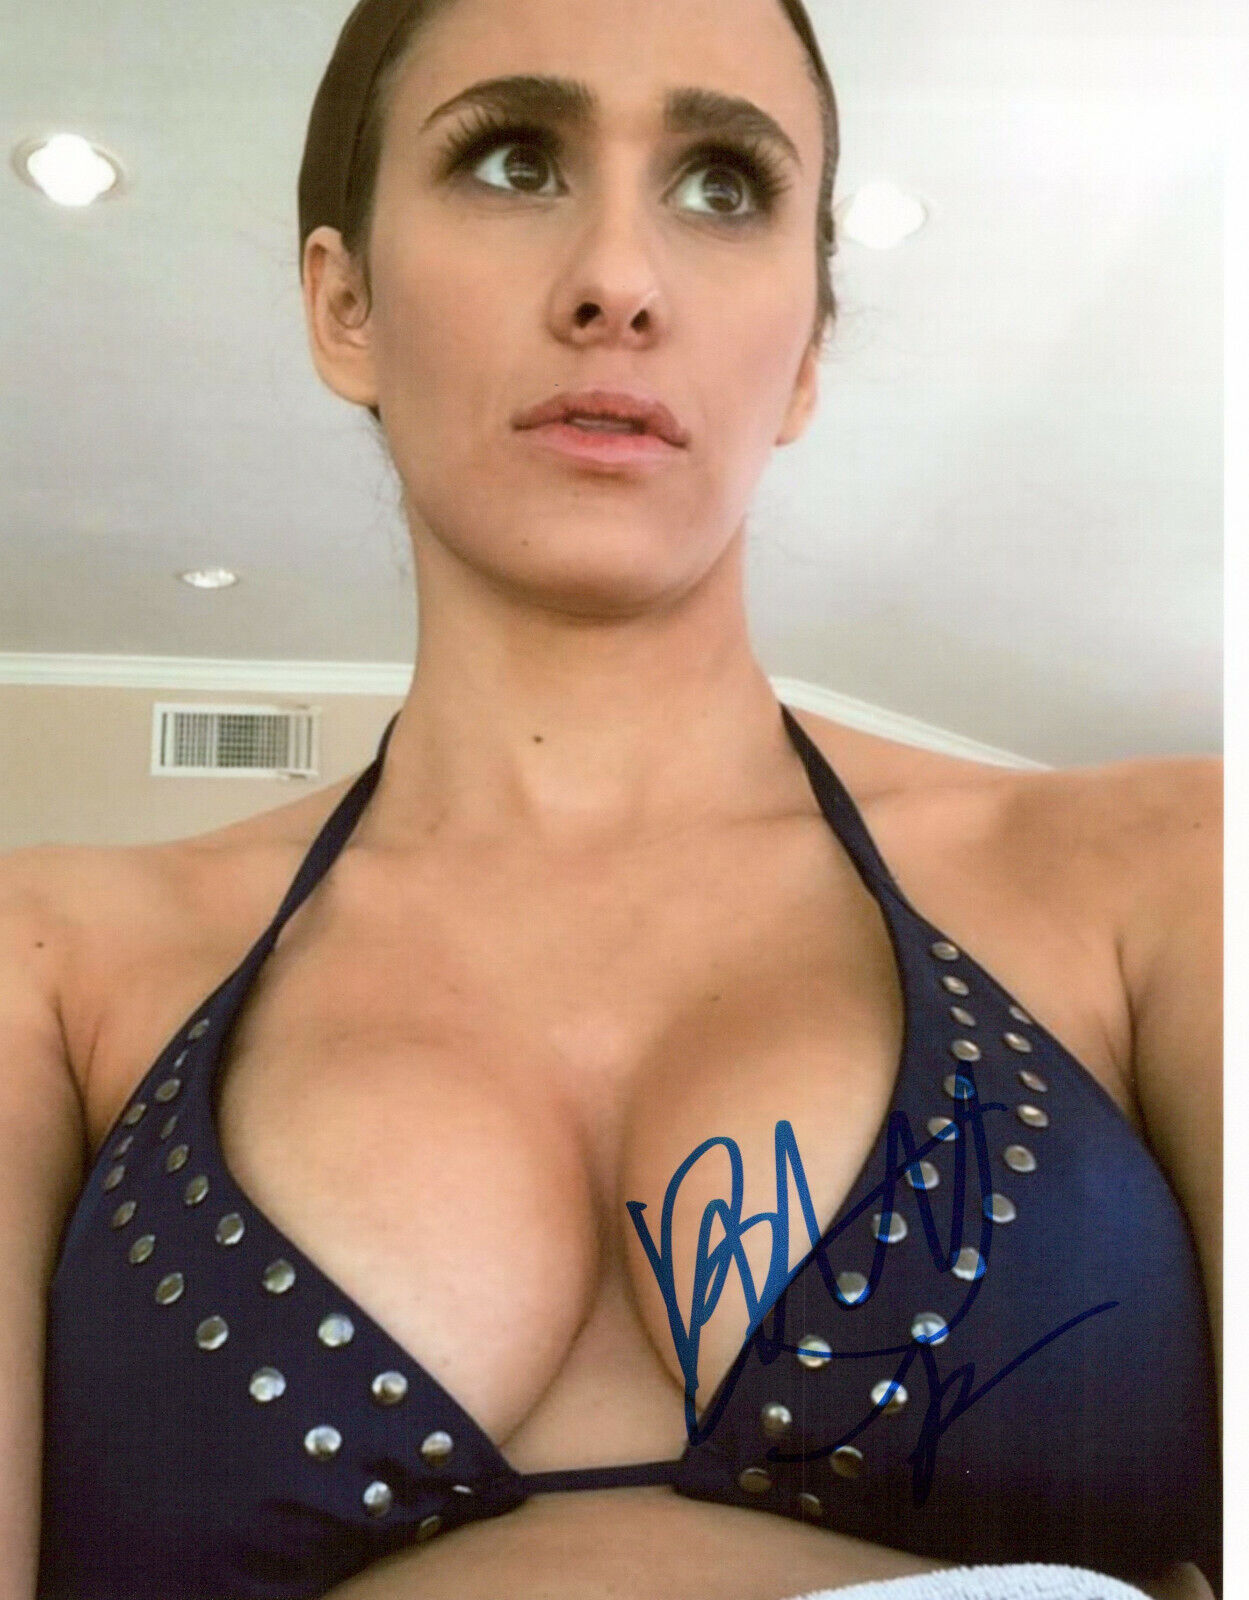 Brittany Furlan glamour shot autographed Photo Poster painting signed 8x10 #8 Instagram comedian